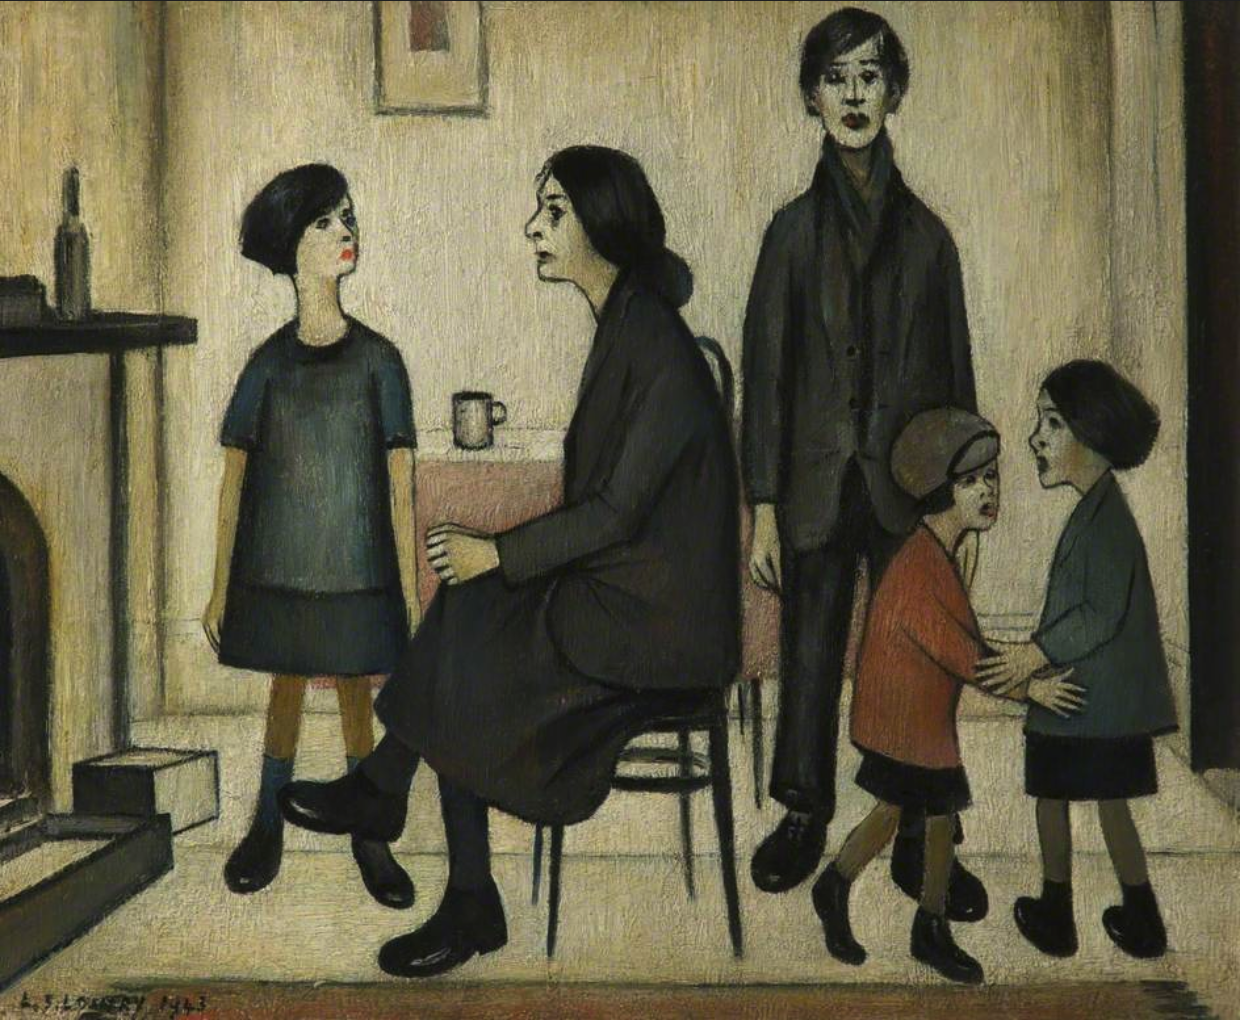 Discord (1943) by Laurence Stephen Lowry (1887 - 1976), English artist.